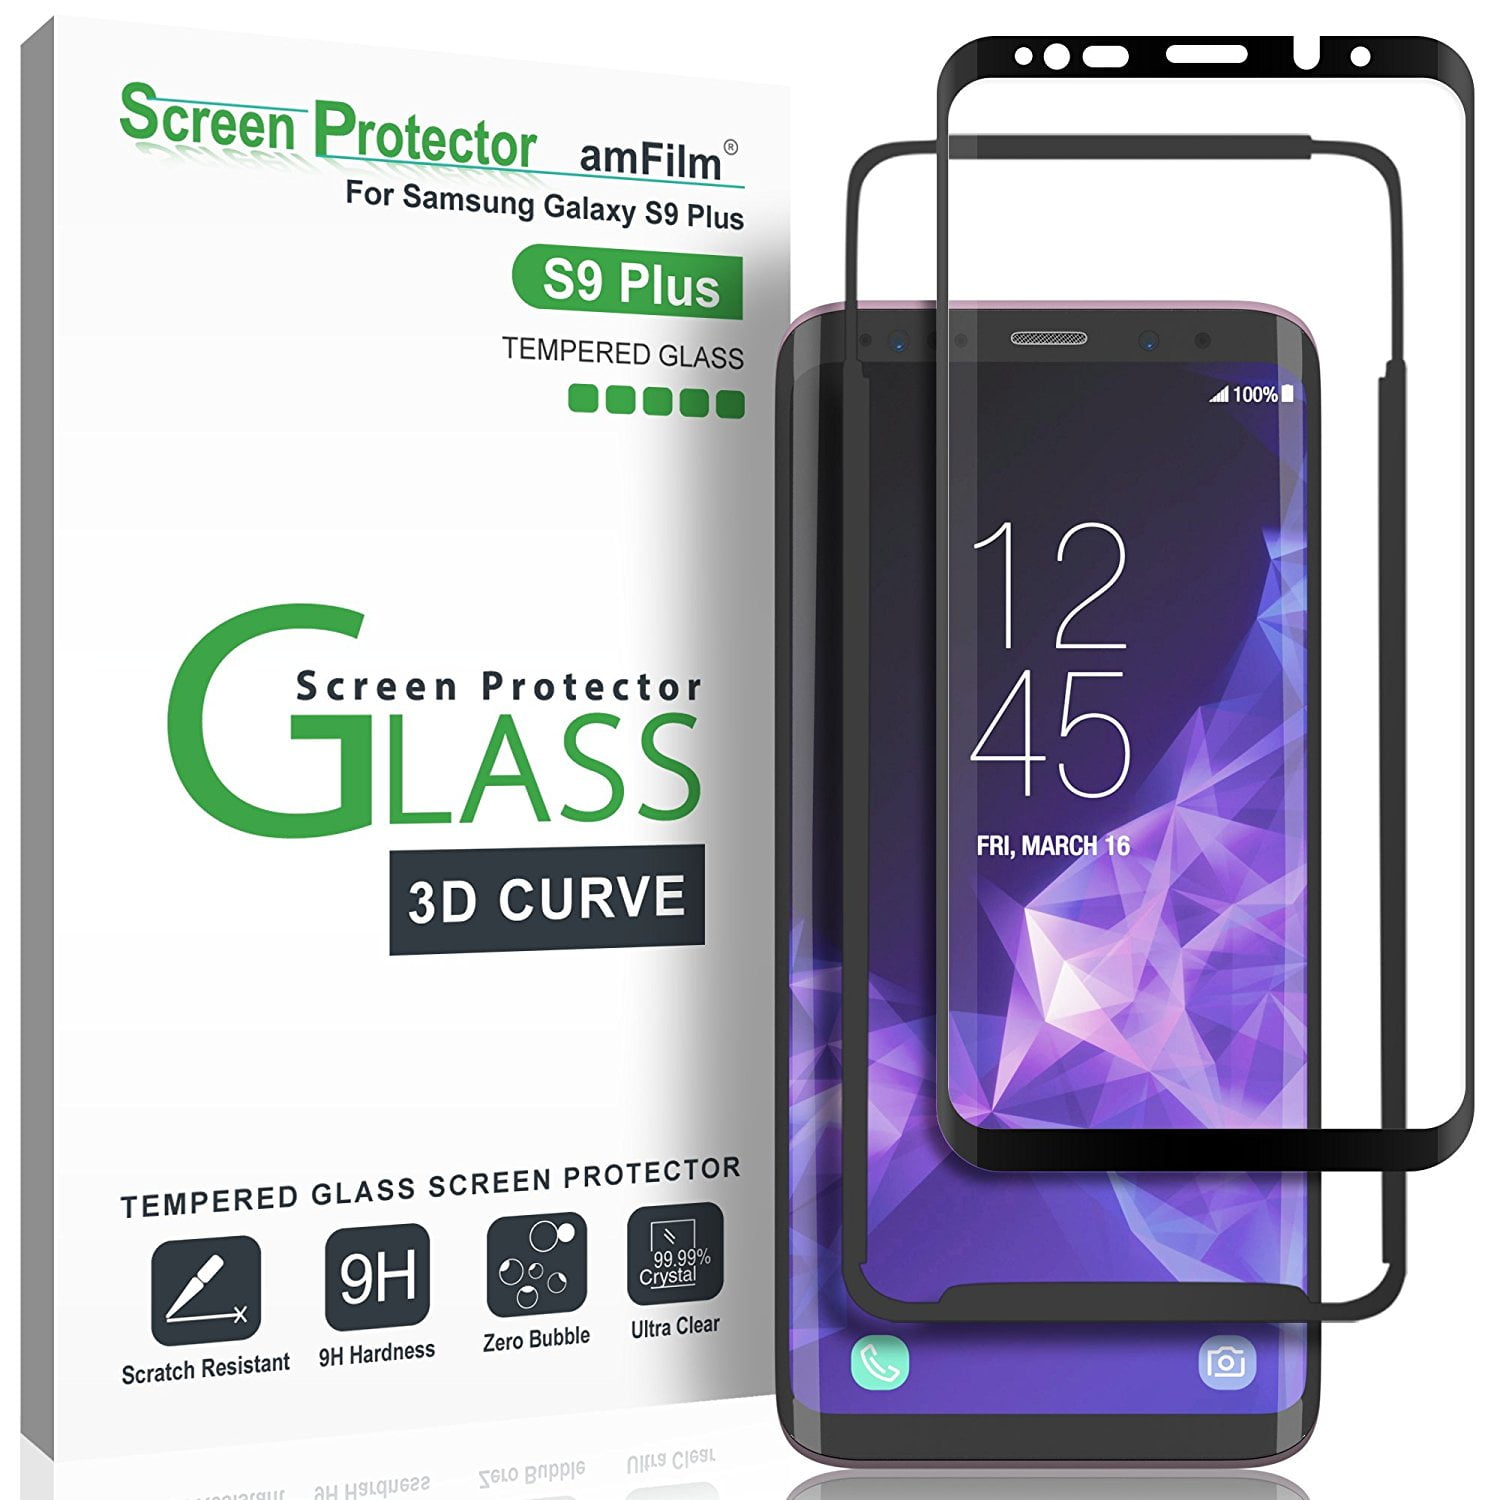 Galaxy S9 Plus Screen Protector Glass Amfilm Full Cover 3d Curved Tempered Glass Screen 